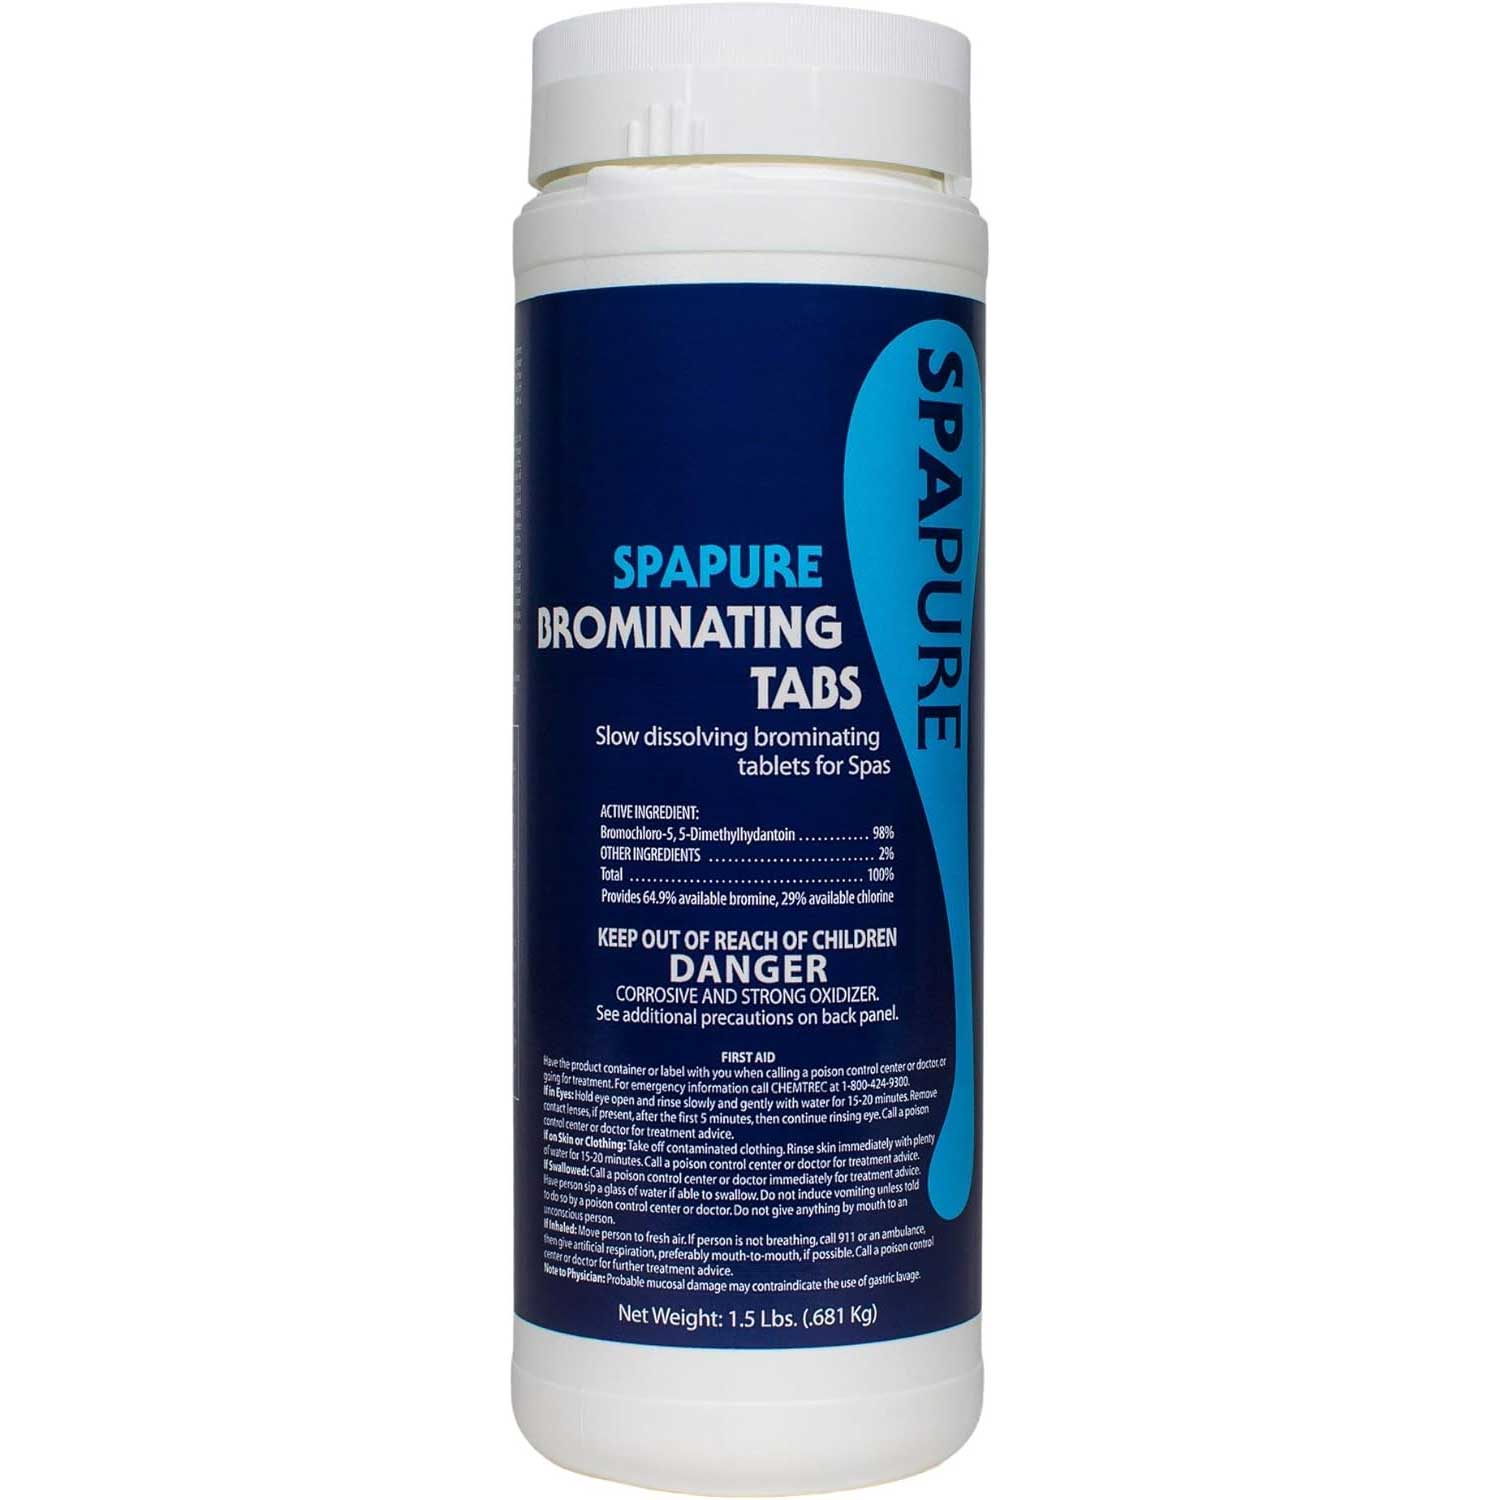 SpaPure 1.5 Pound Brominating Tabs